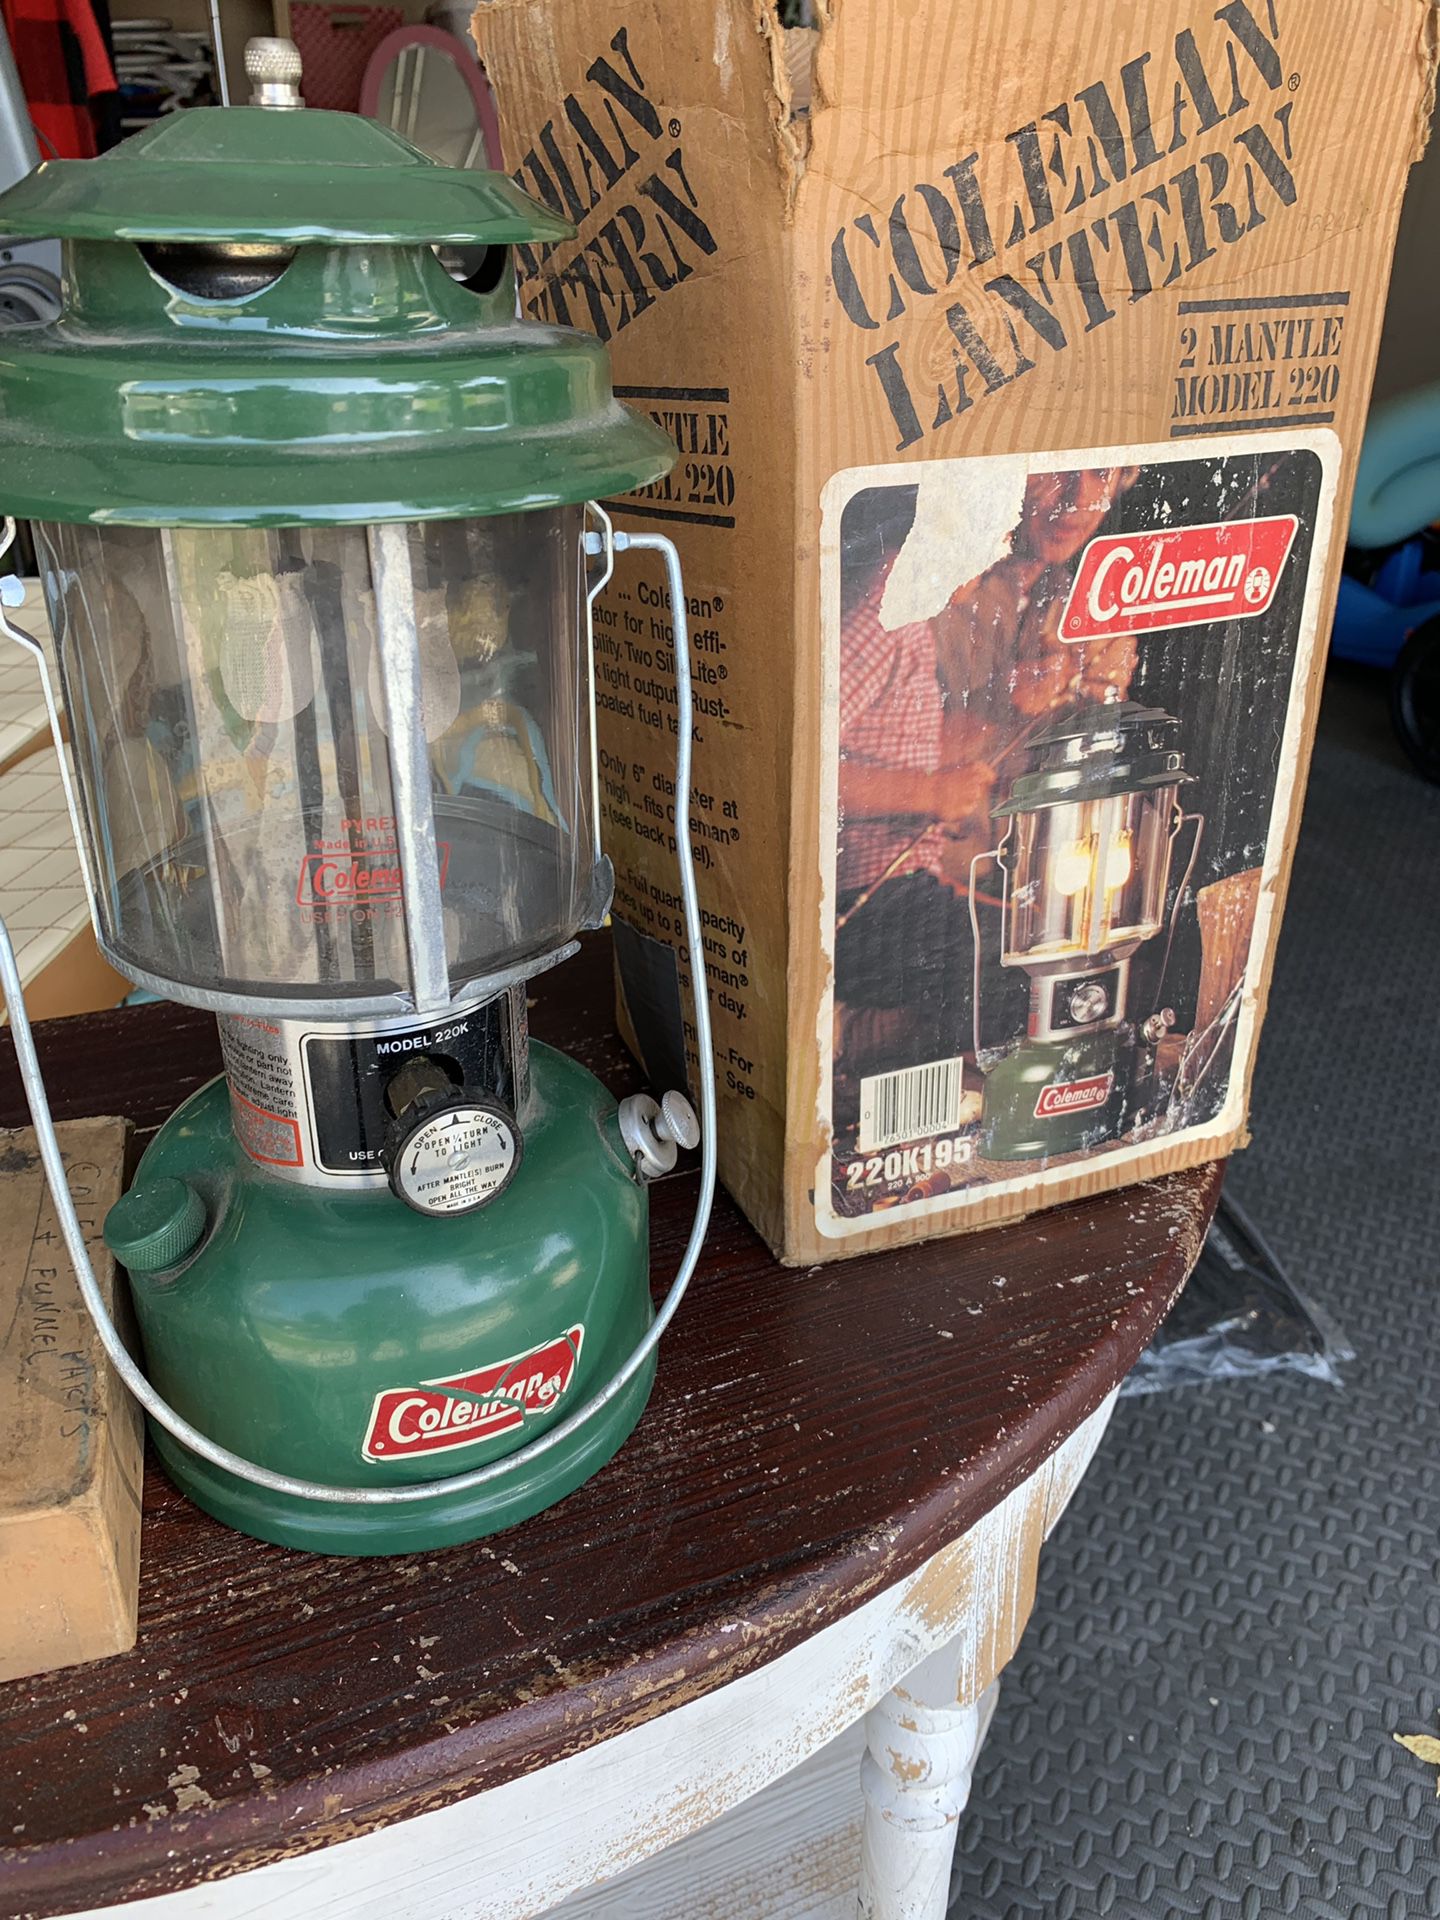 1981. Coleman 220k lantern with fuel funnel